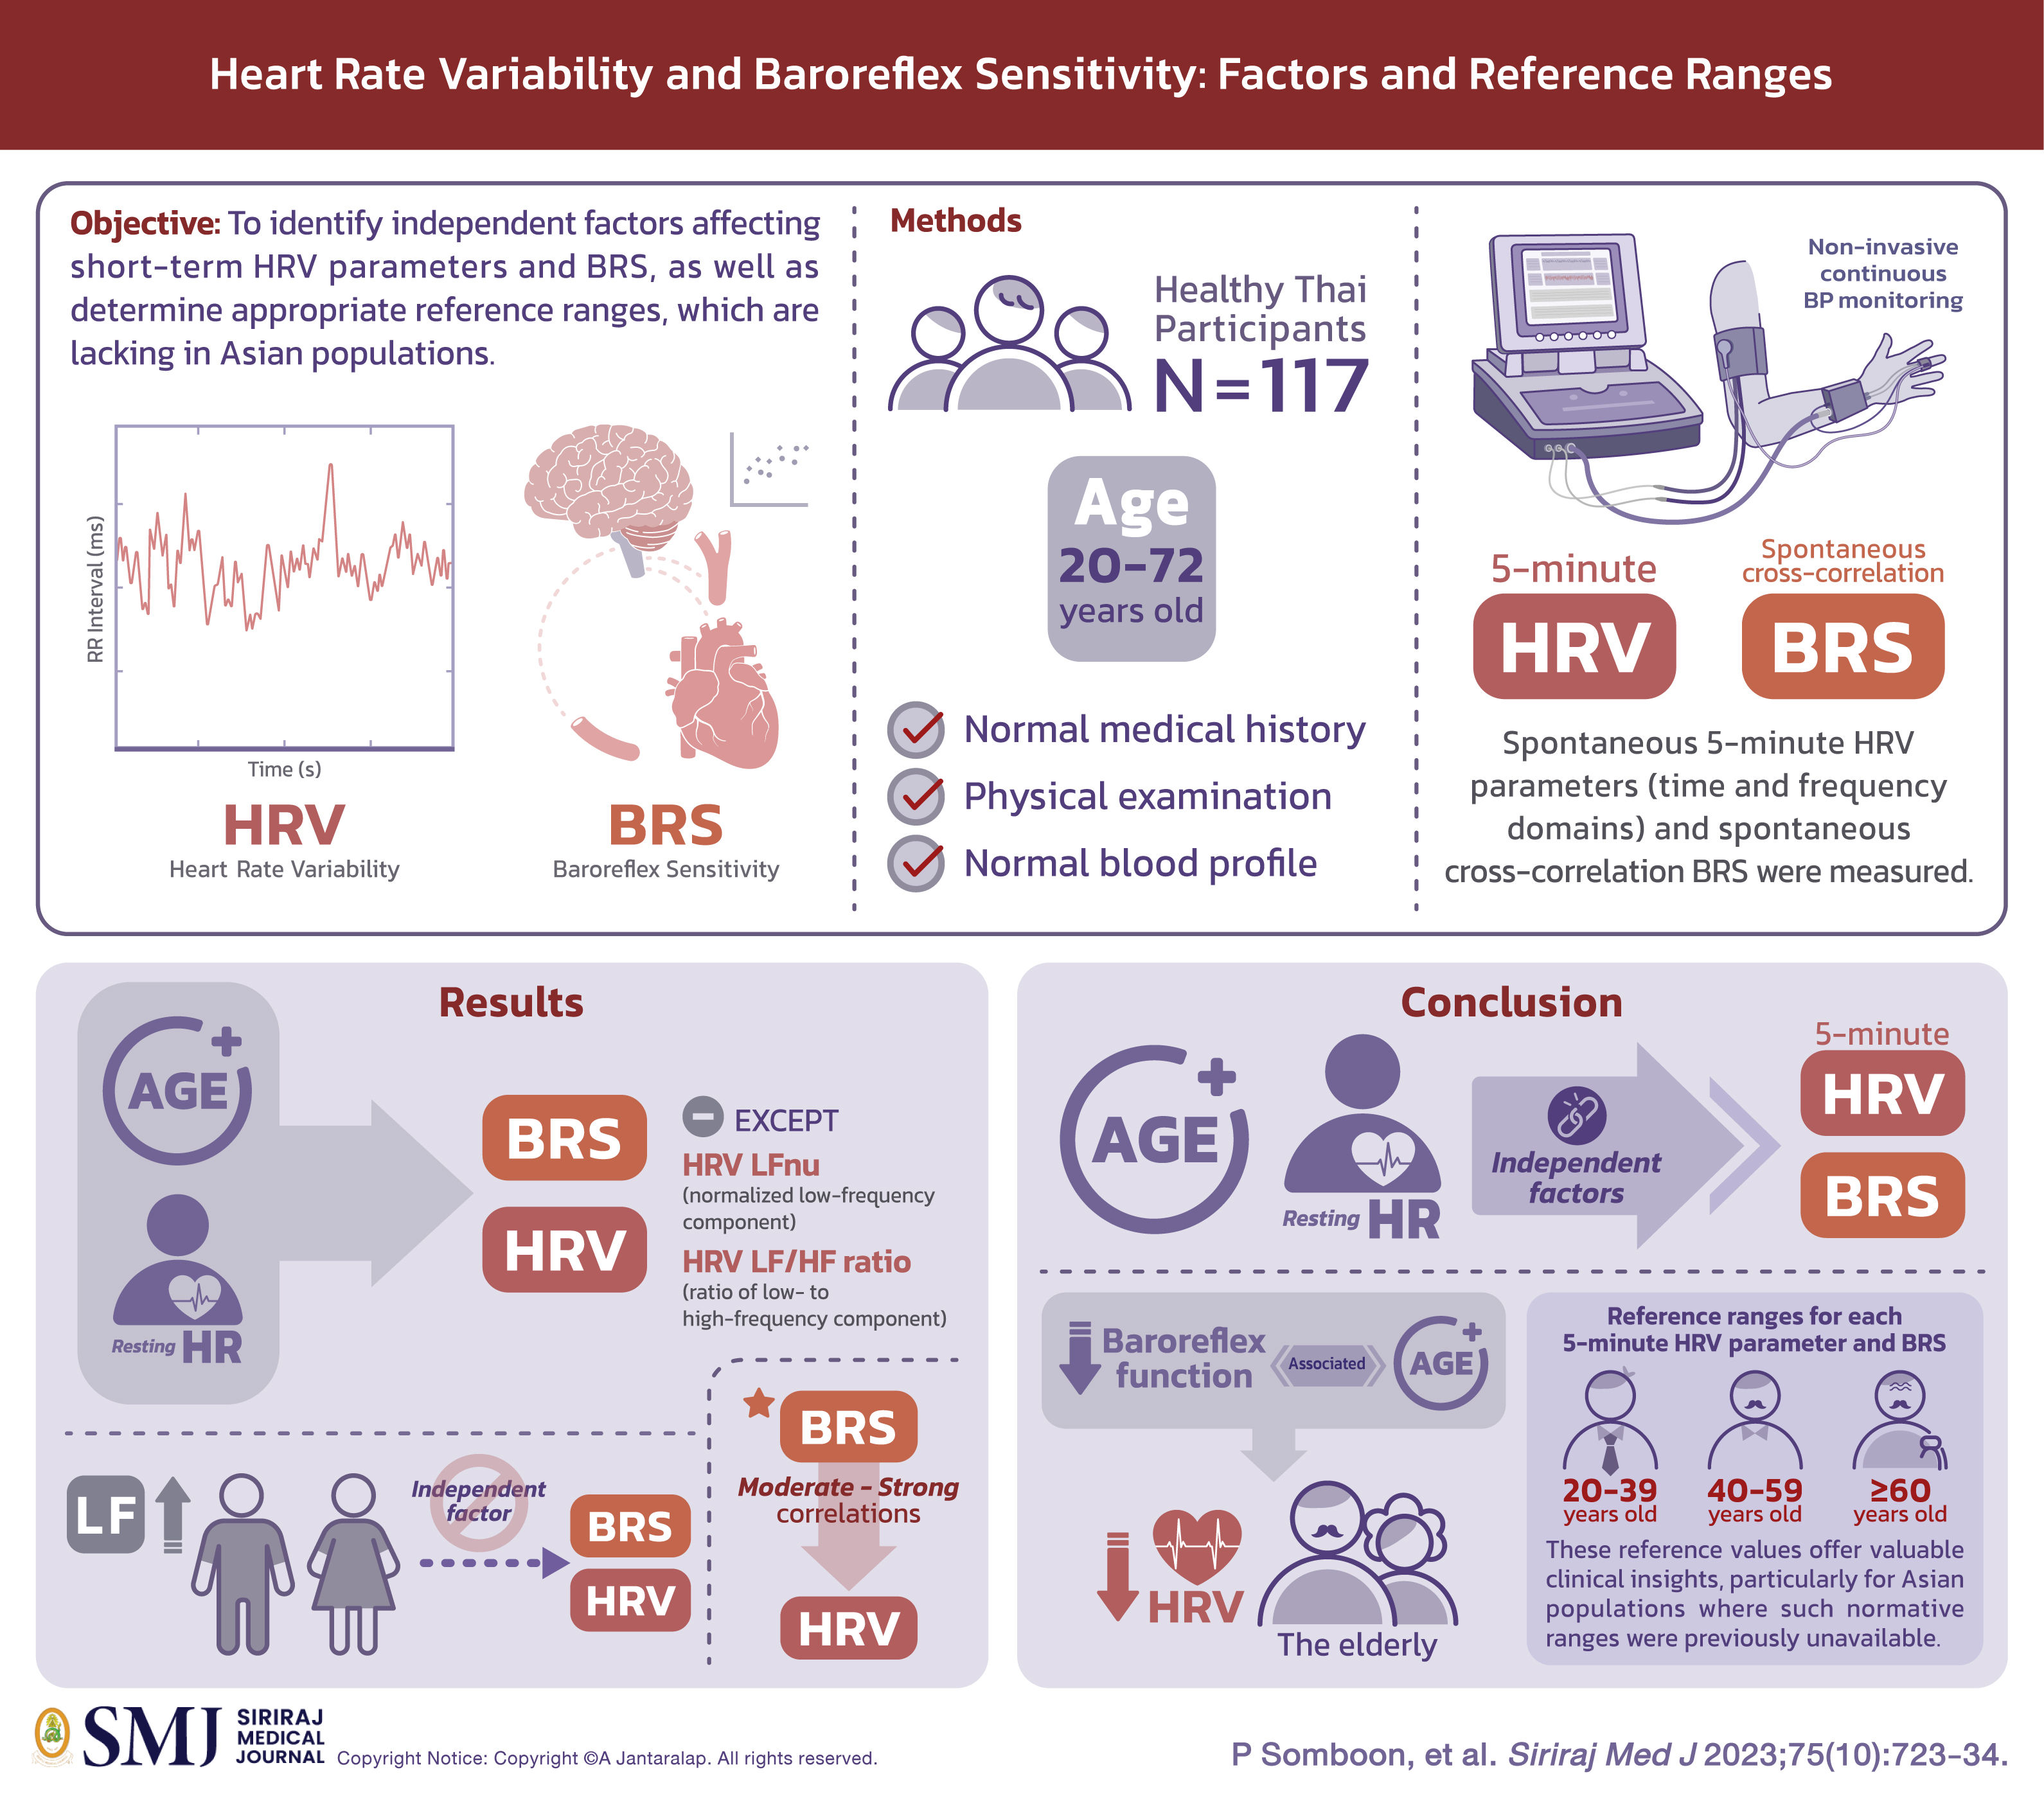 Heart Rate Variability and Baroreflex Sensitivity: Factors and Reference Ranges